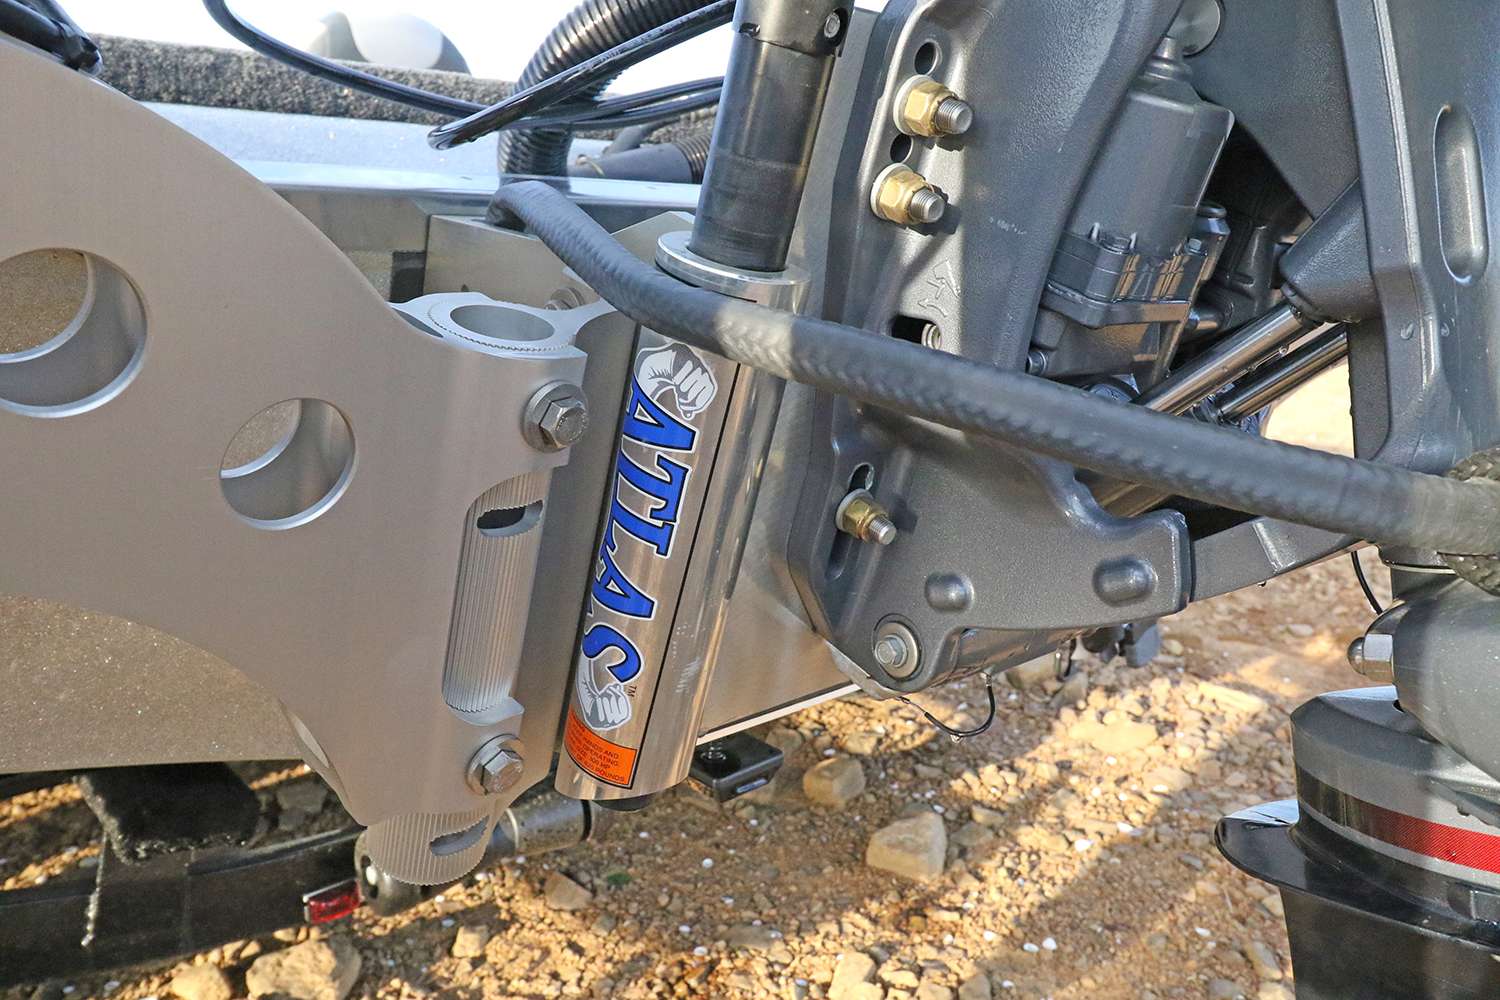 A T-H Marine Atlas Hydraulic Jack Plate moves the Yamaha 250 along the Y axis.